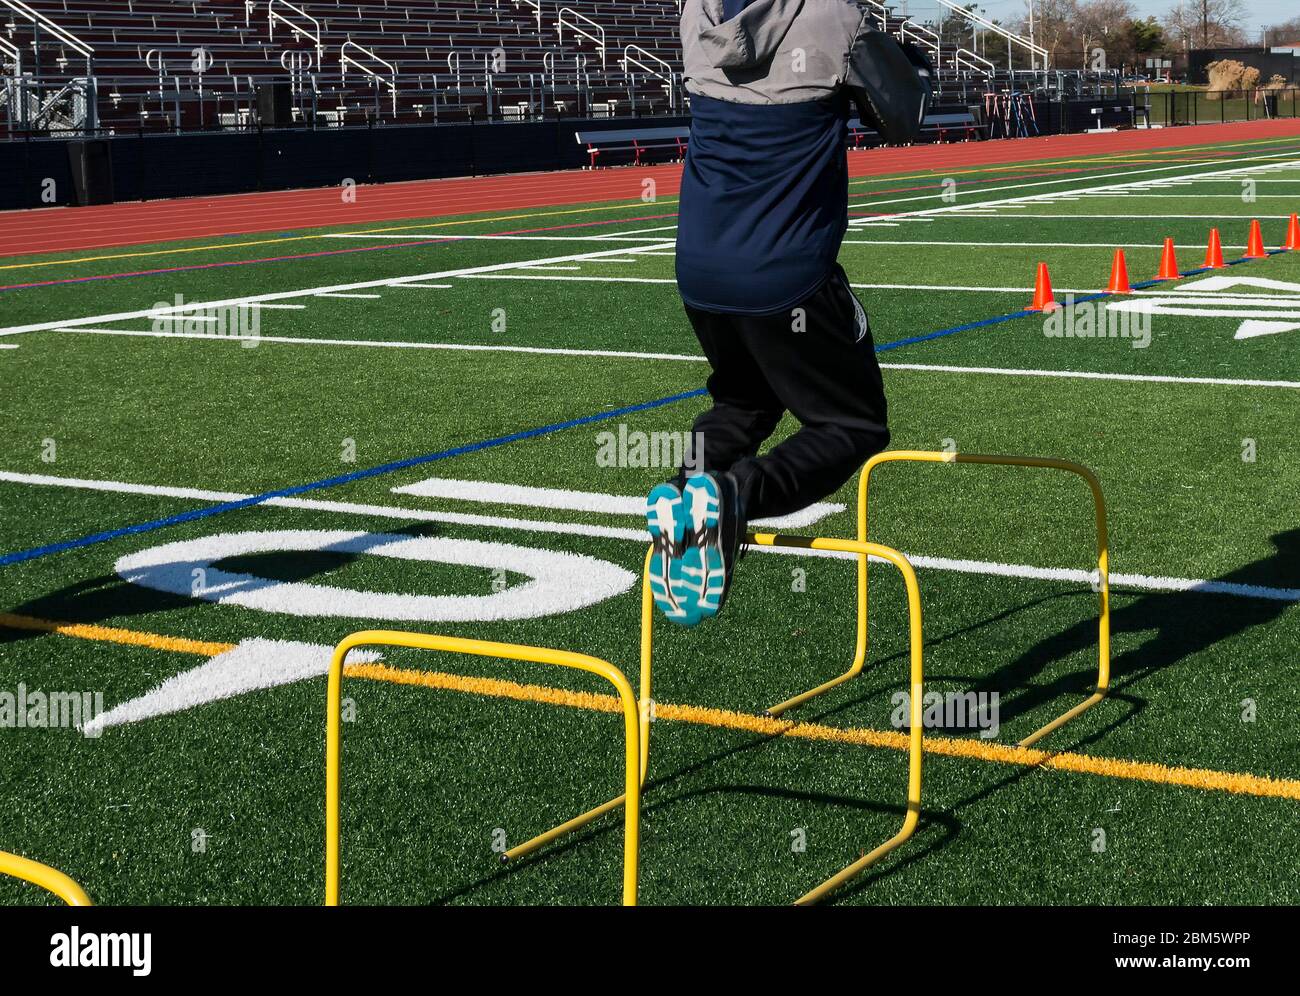 A track and field athlete jumping over yellow mini hurdles on a turf field from behind the runner. Stock Photo